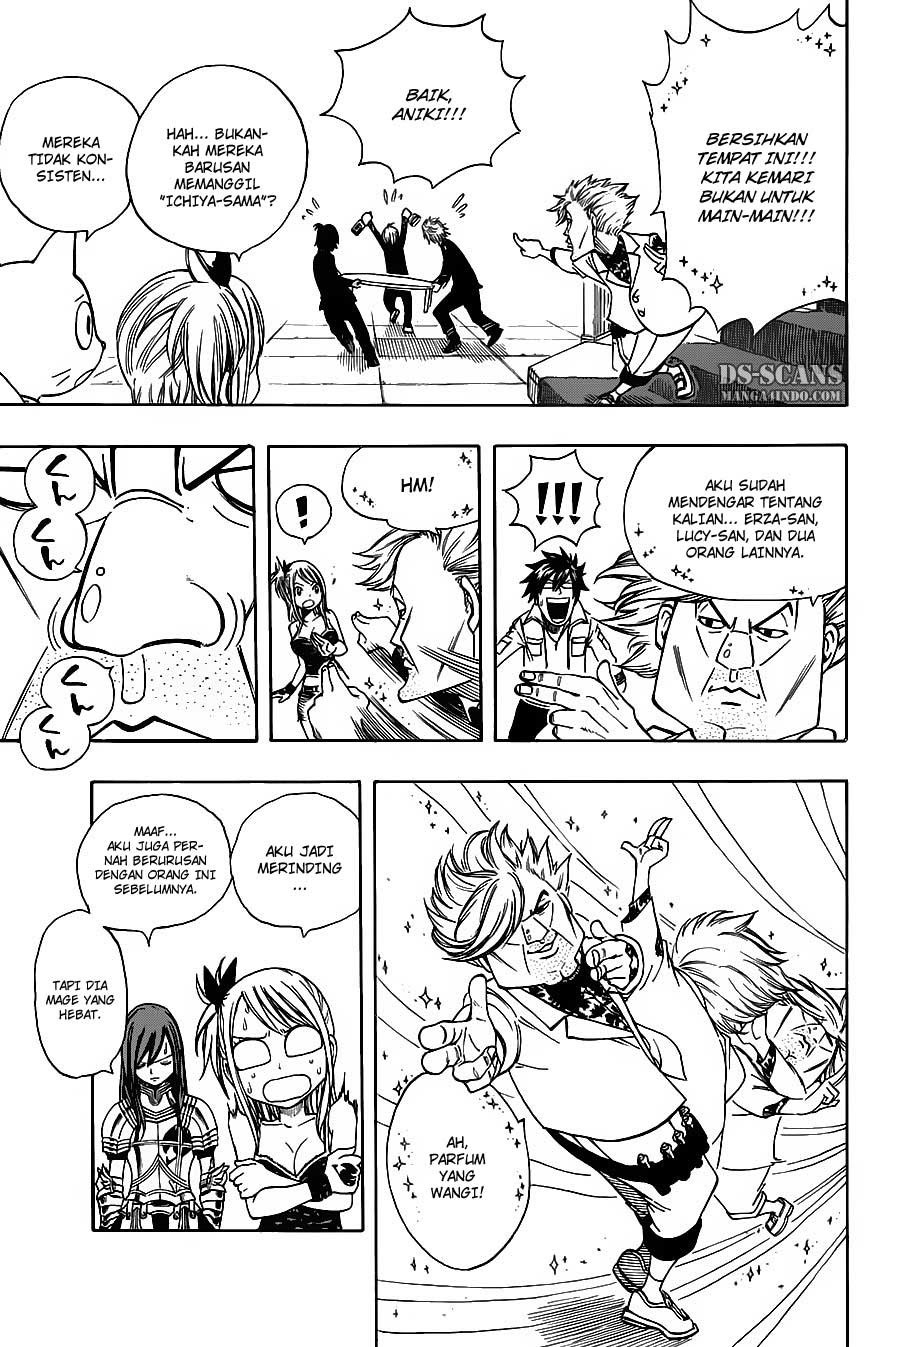 Fairy Tail Chapter 132